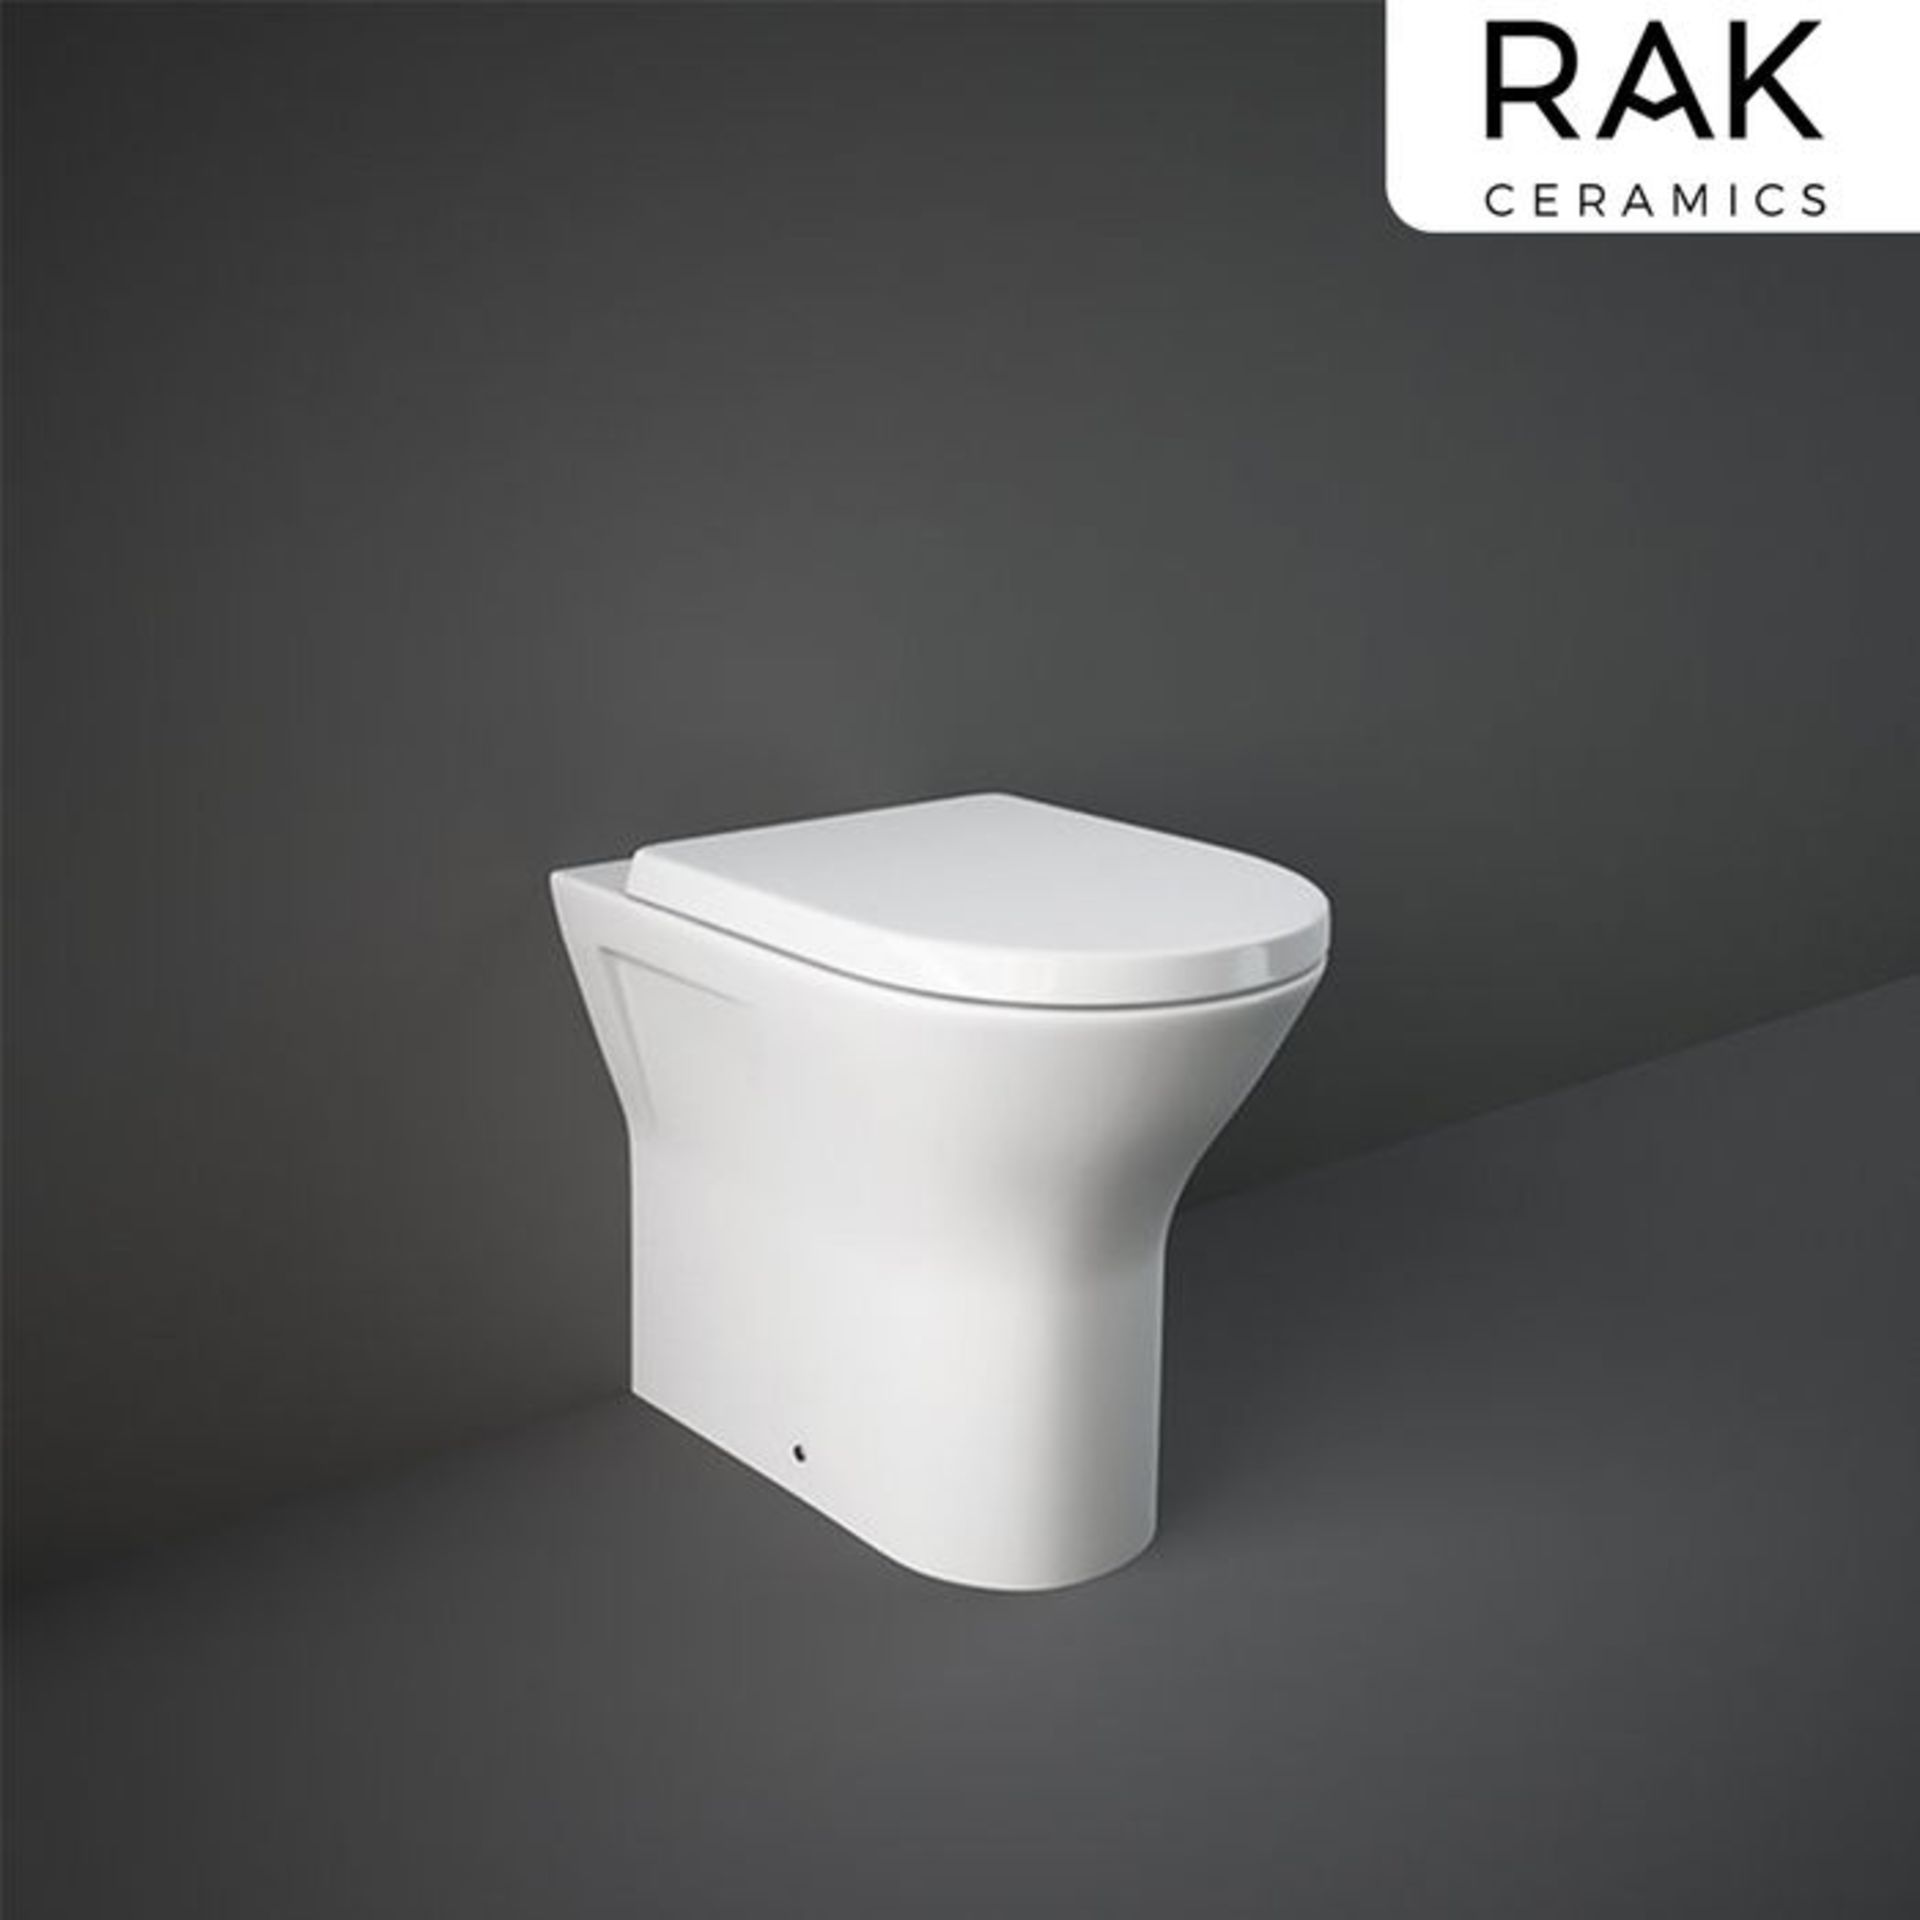 (AL20) RAK Resort Rimless Back to Wall Toilet. Rimless design makes it easy to clean Anti-scratch